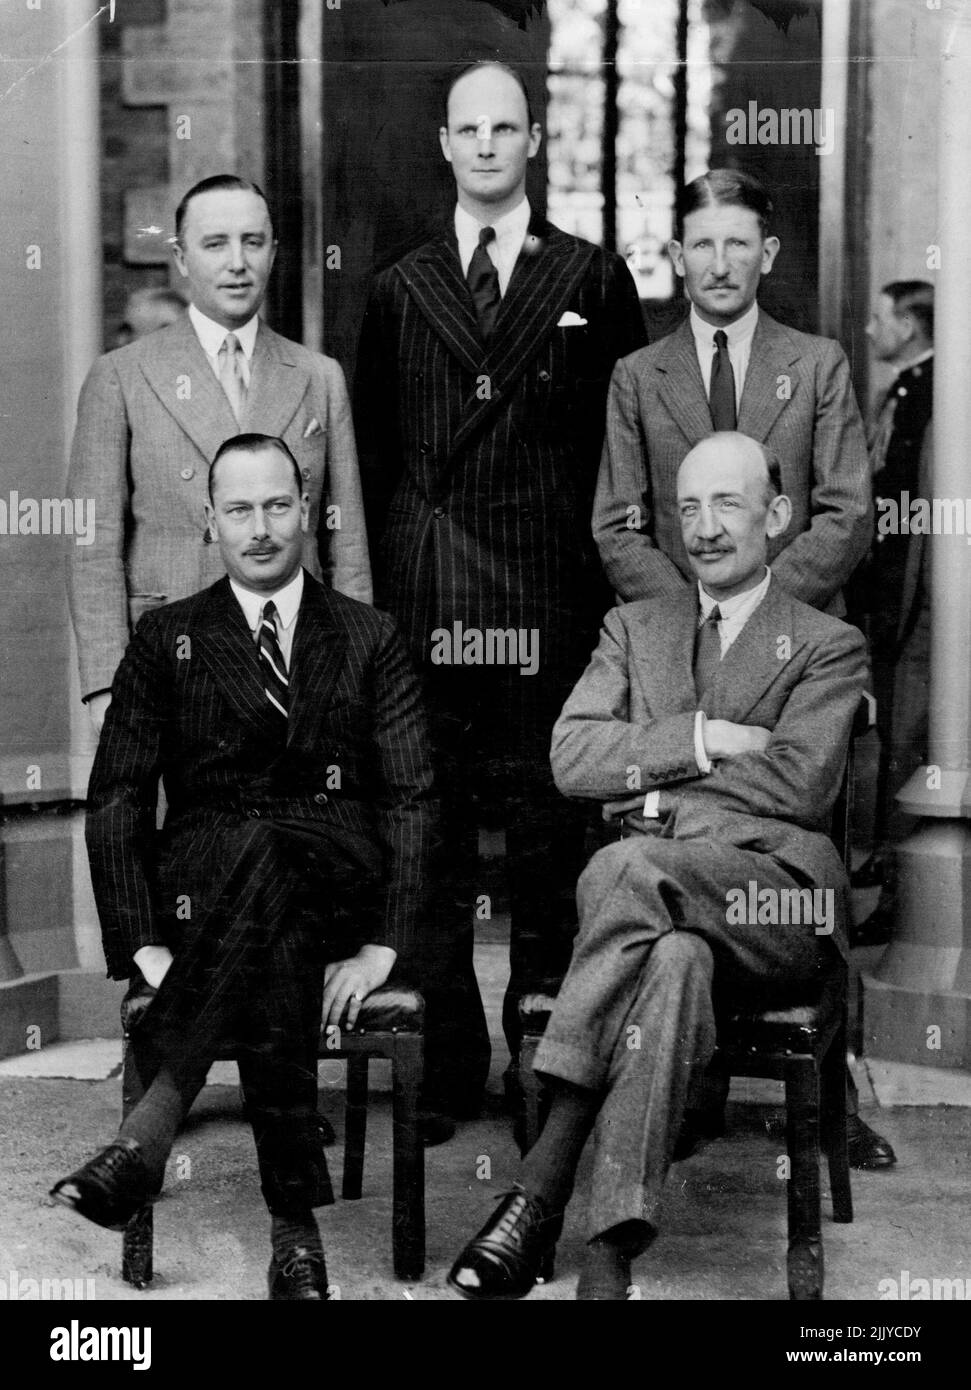 Left Prince (seated left) with his Chief of staff (Mayor-General Howard-Myse) standing (from left) Capt Howard Kerr equaling Capt Derek Schreiber second equally & Captain Arthur Curtis, Private Secretary.October 8, 1934. Stock Photo